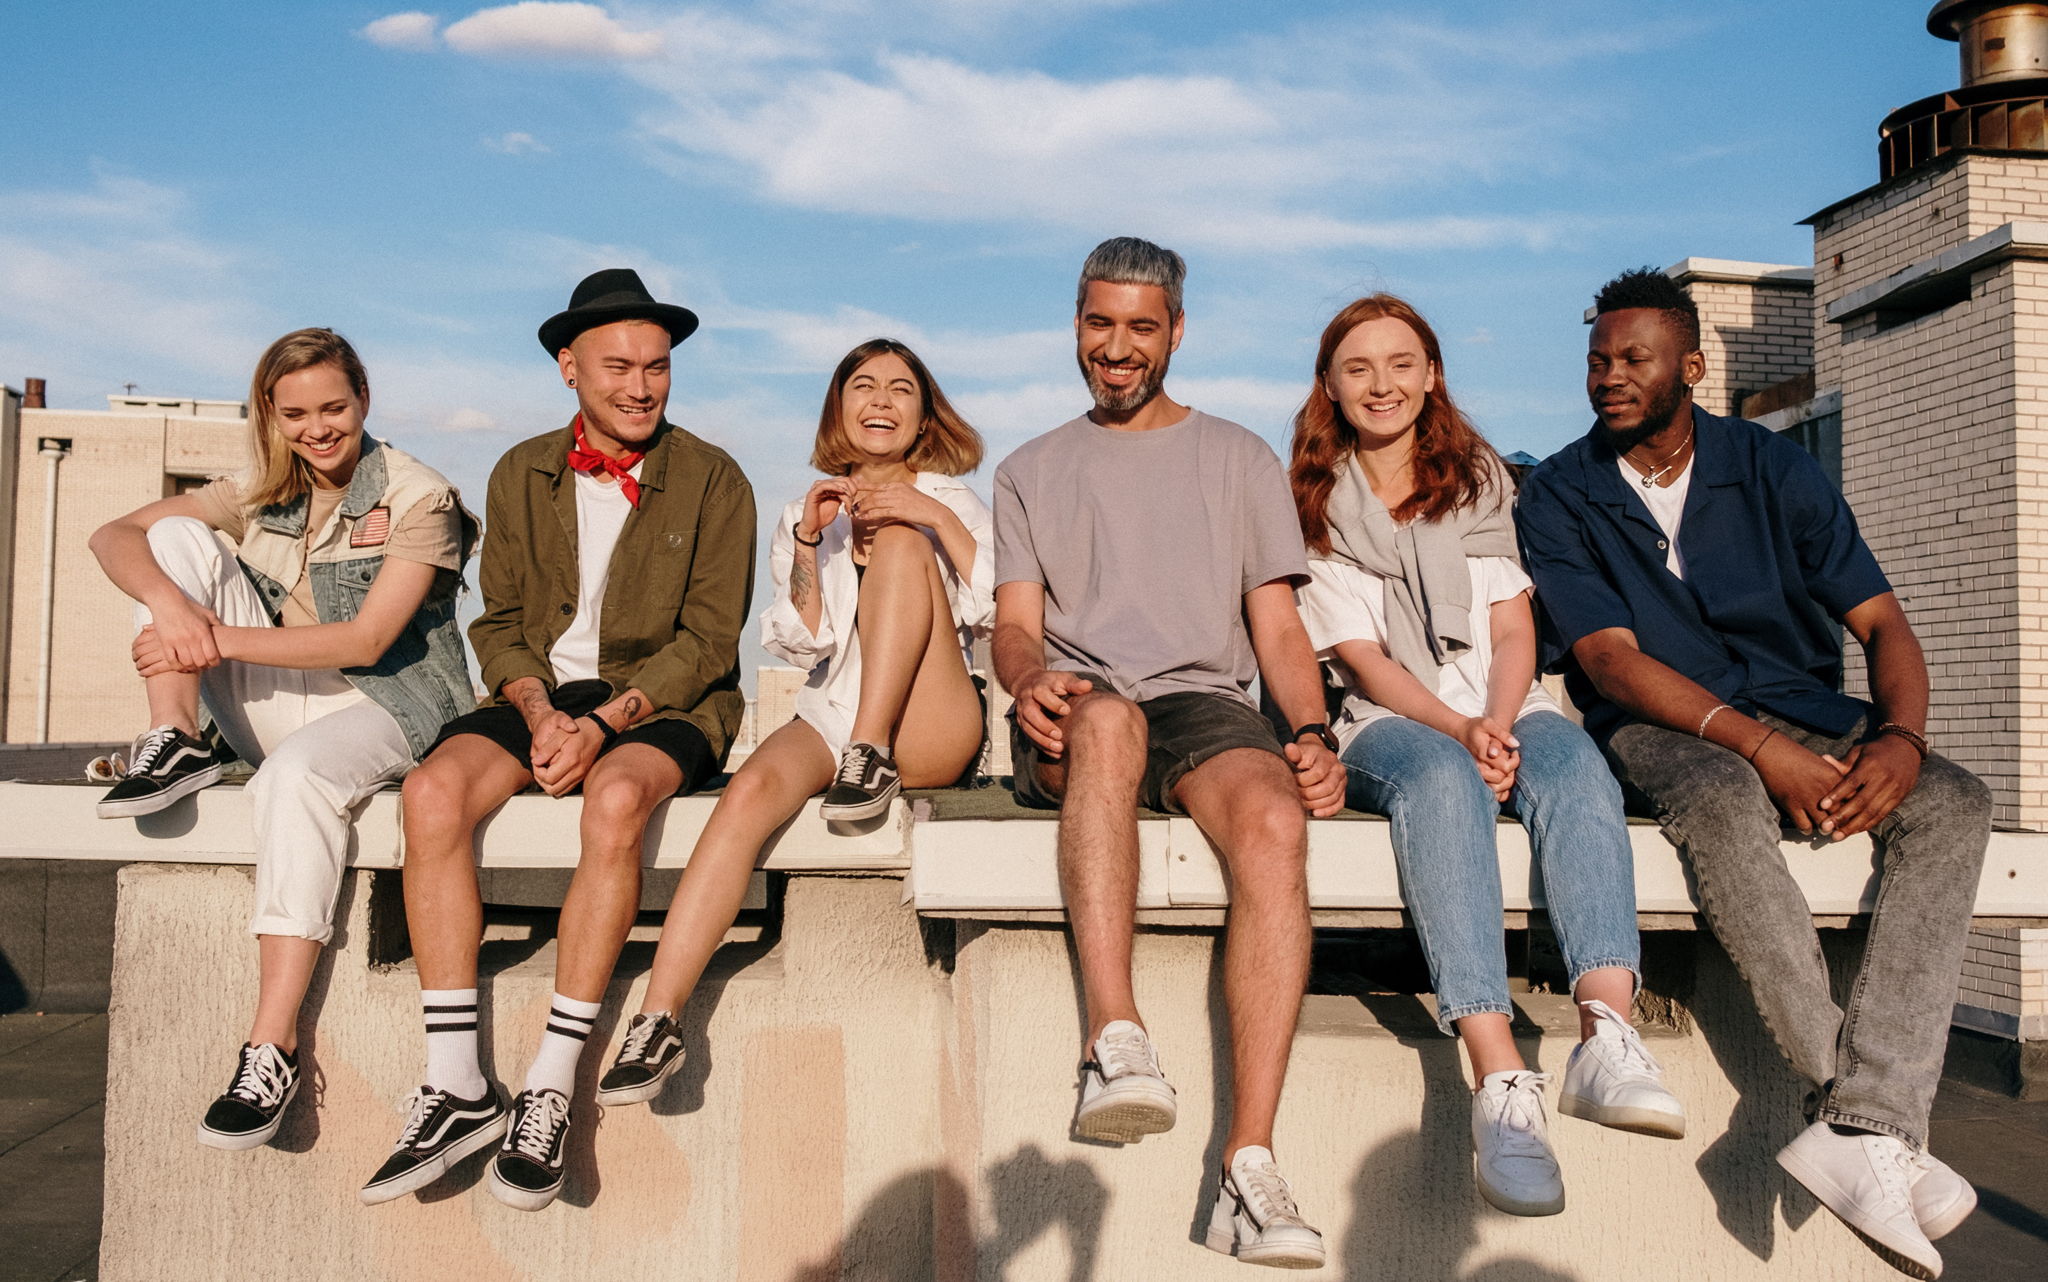 A large group of attractive and hip people smiling and sitting together on the edge at the roof of a building.